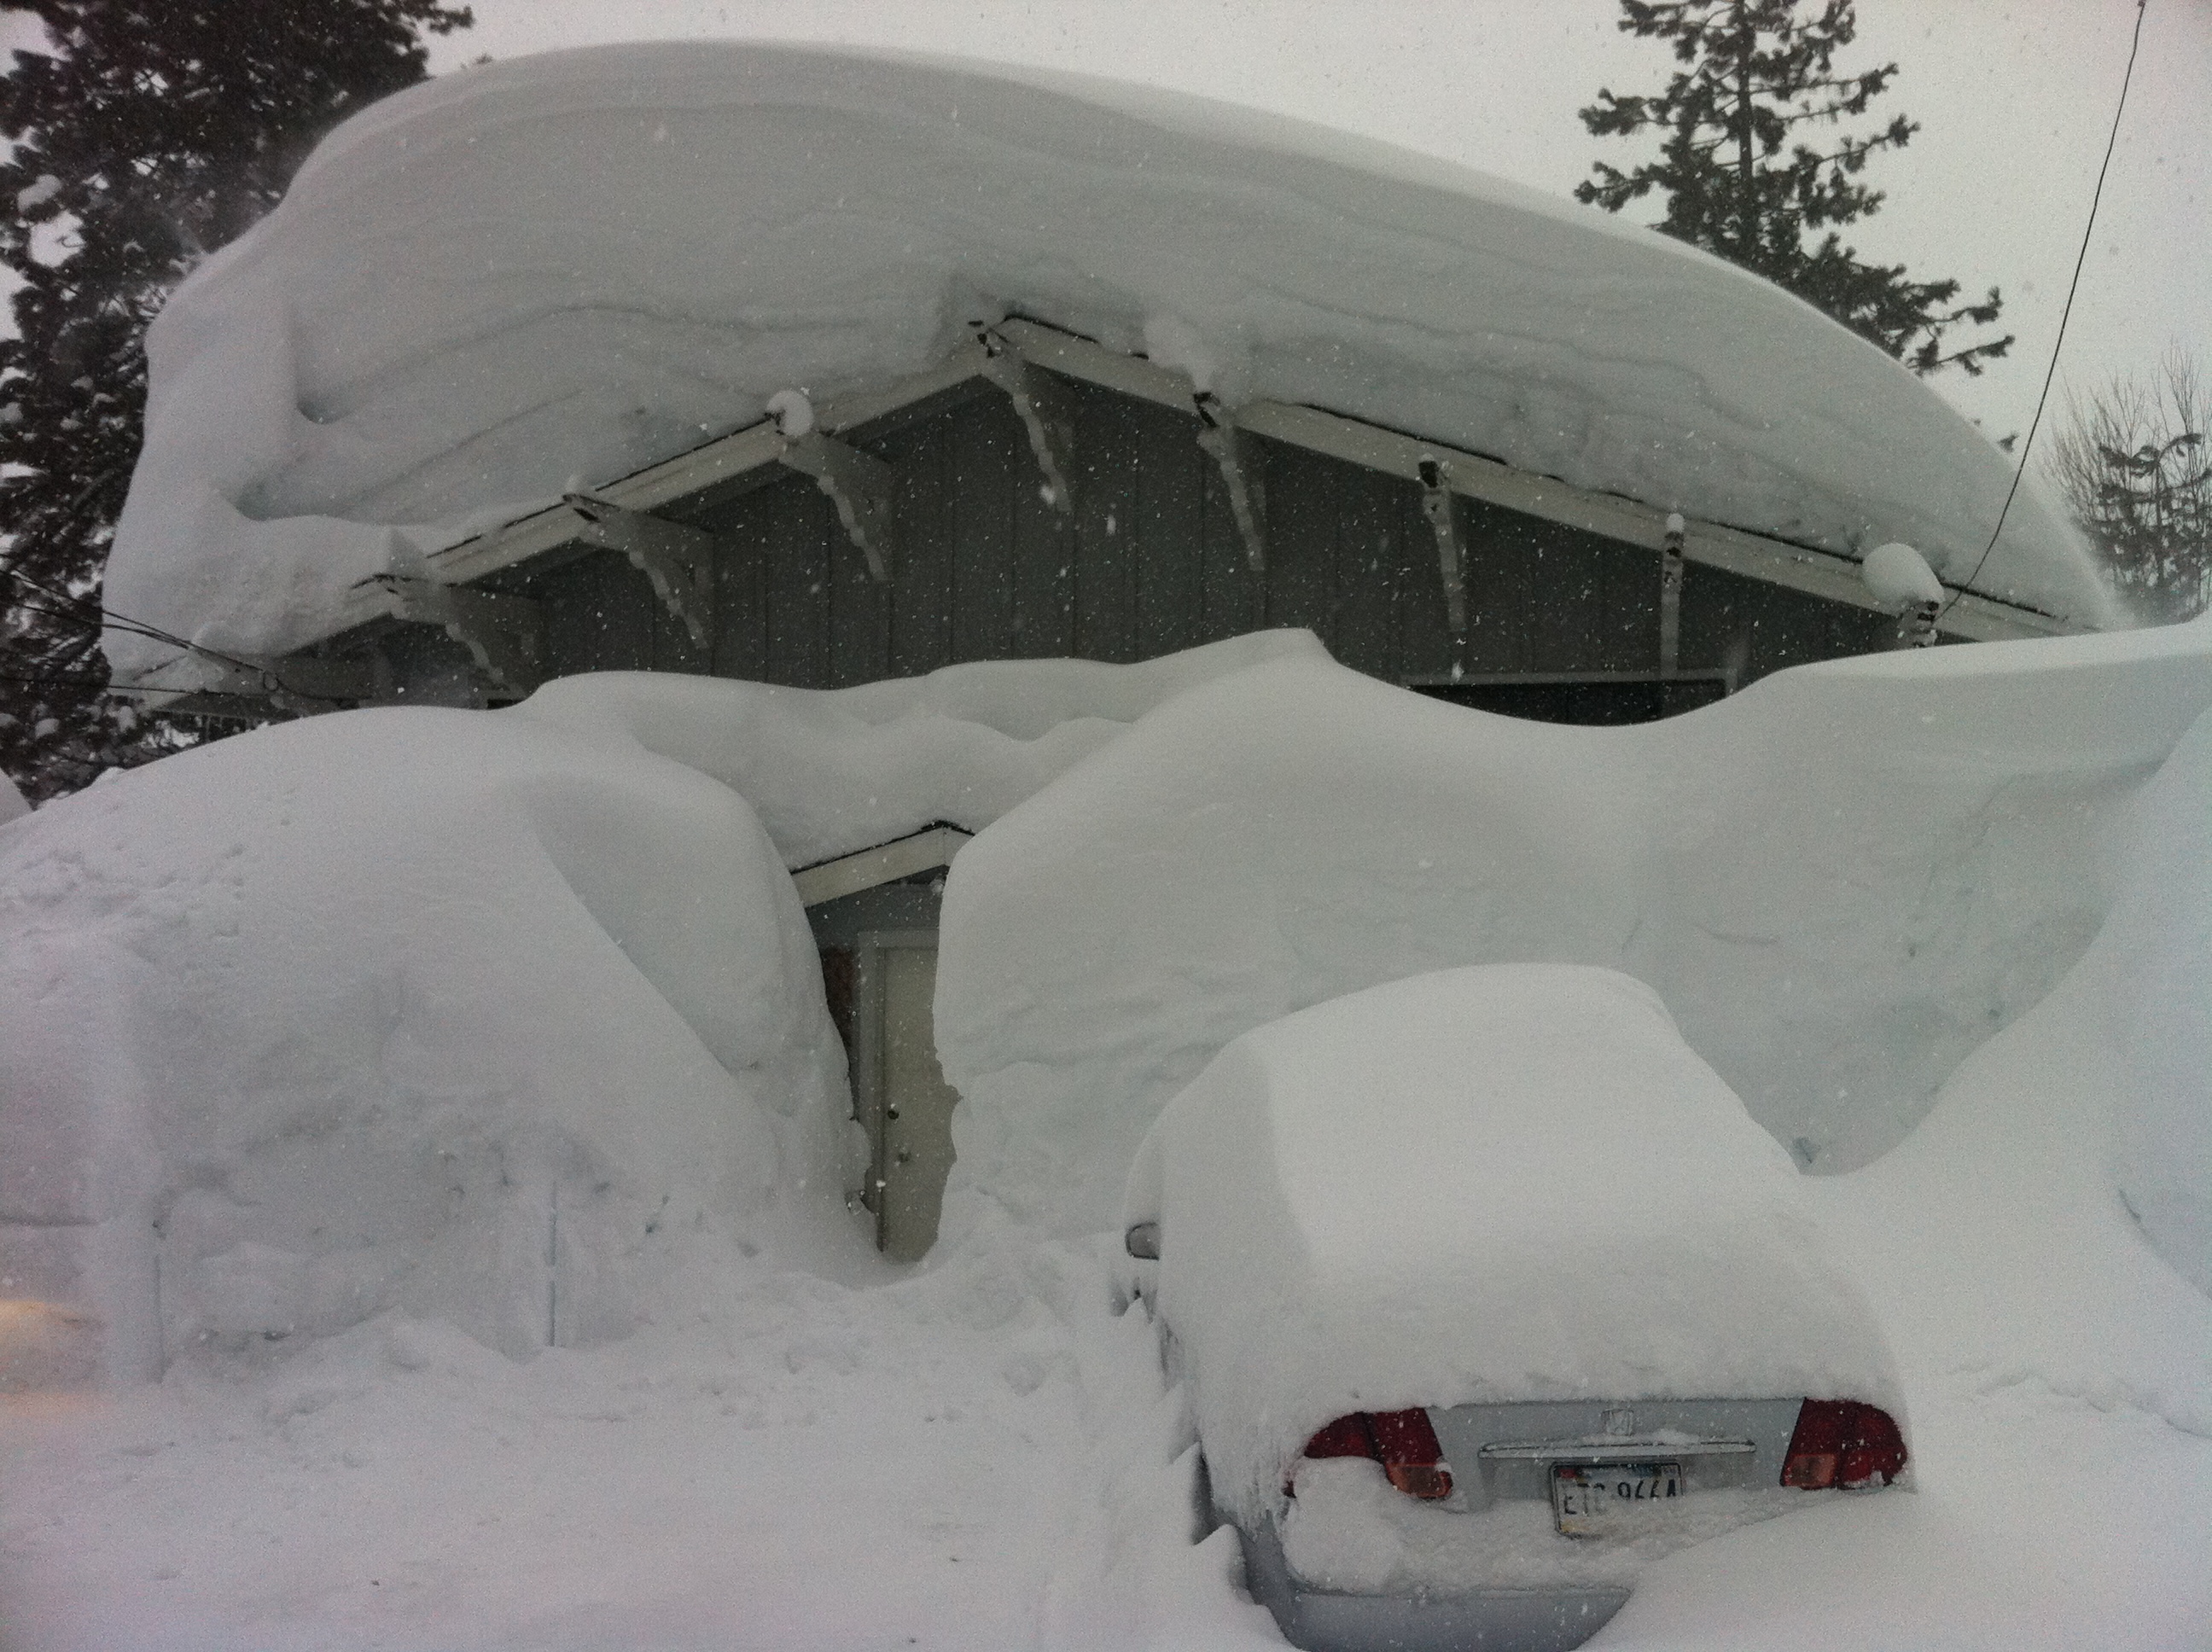 Squaw Valley, CA in March 2011 – the last strong La Nina. photo: snowbrains